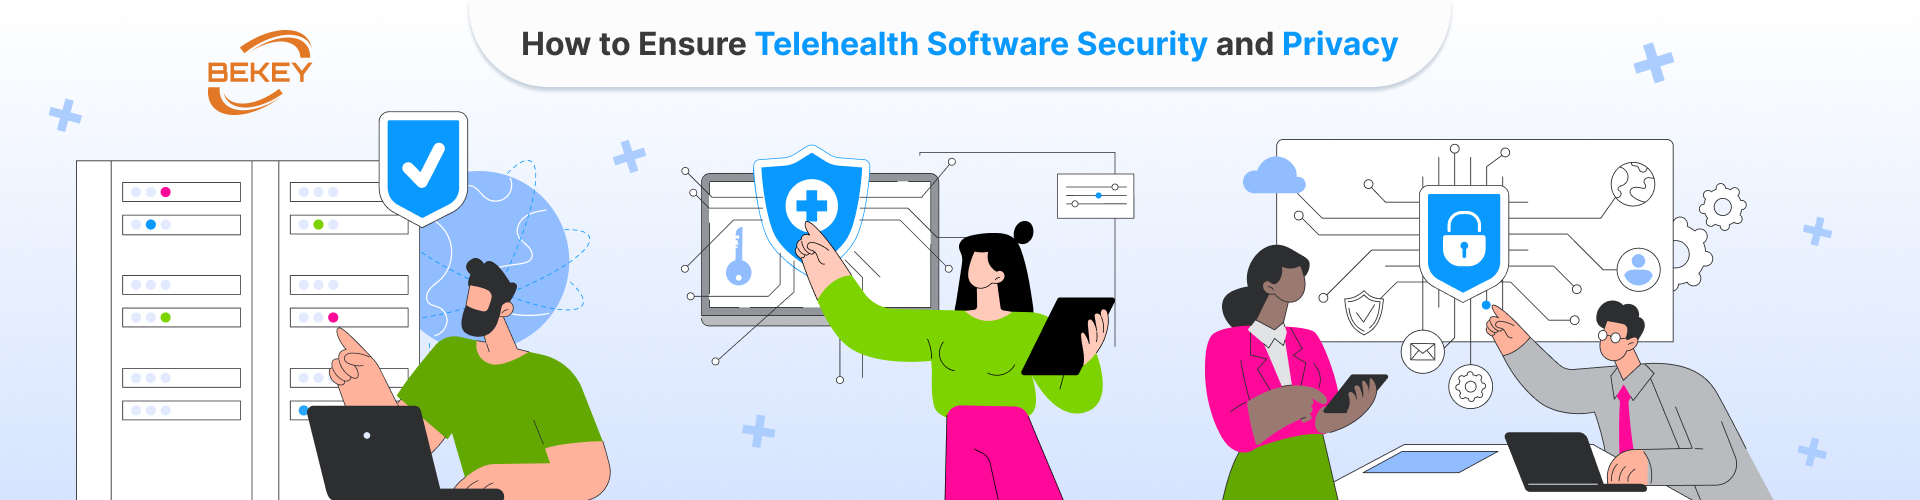 How to Ensure Telehealth Software Security and Privacy - image